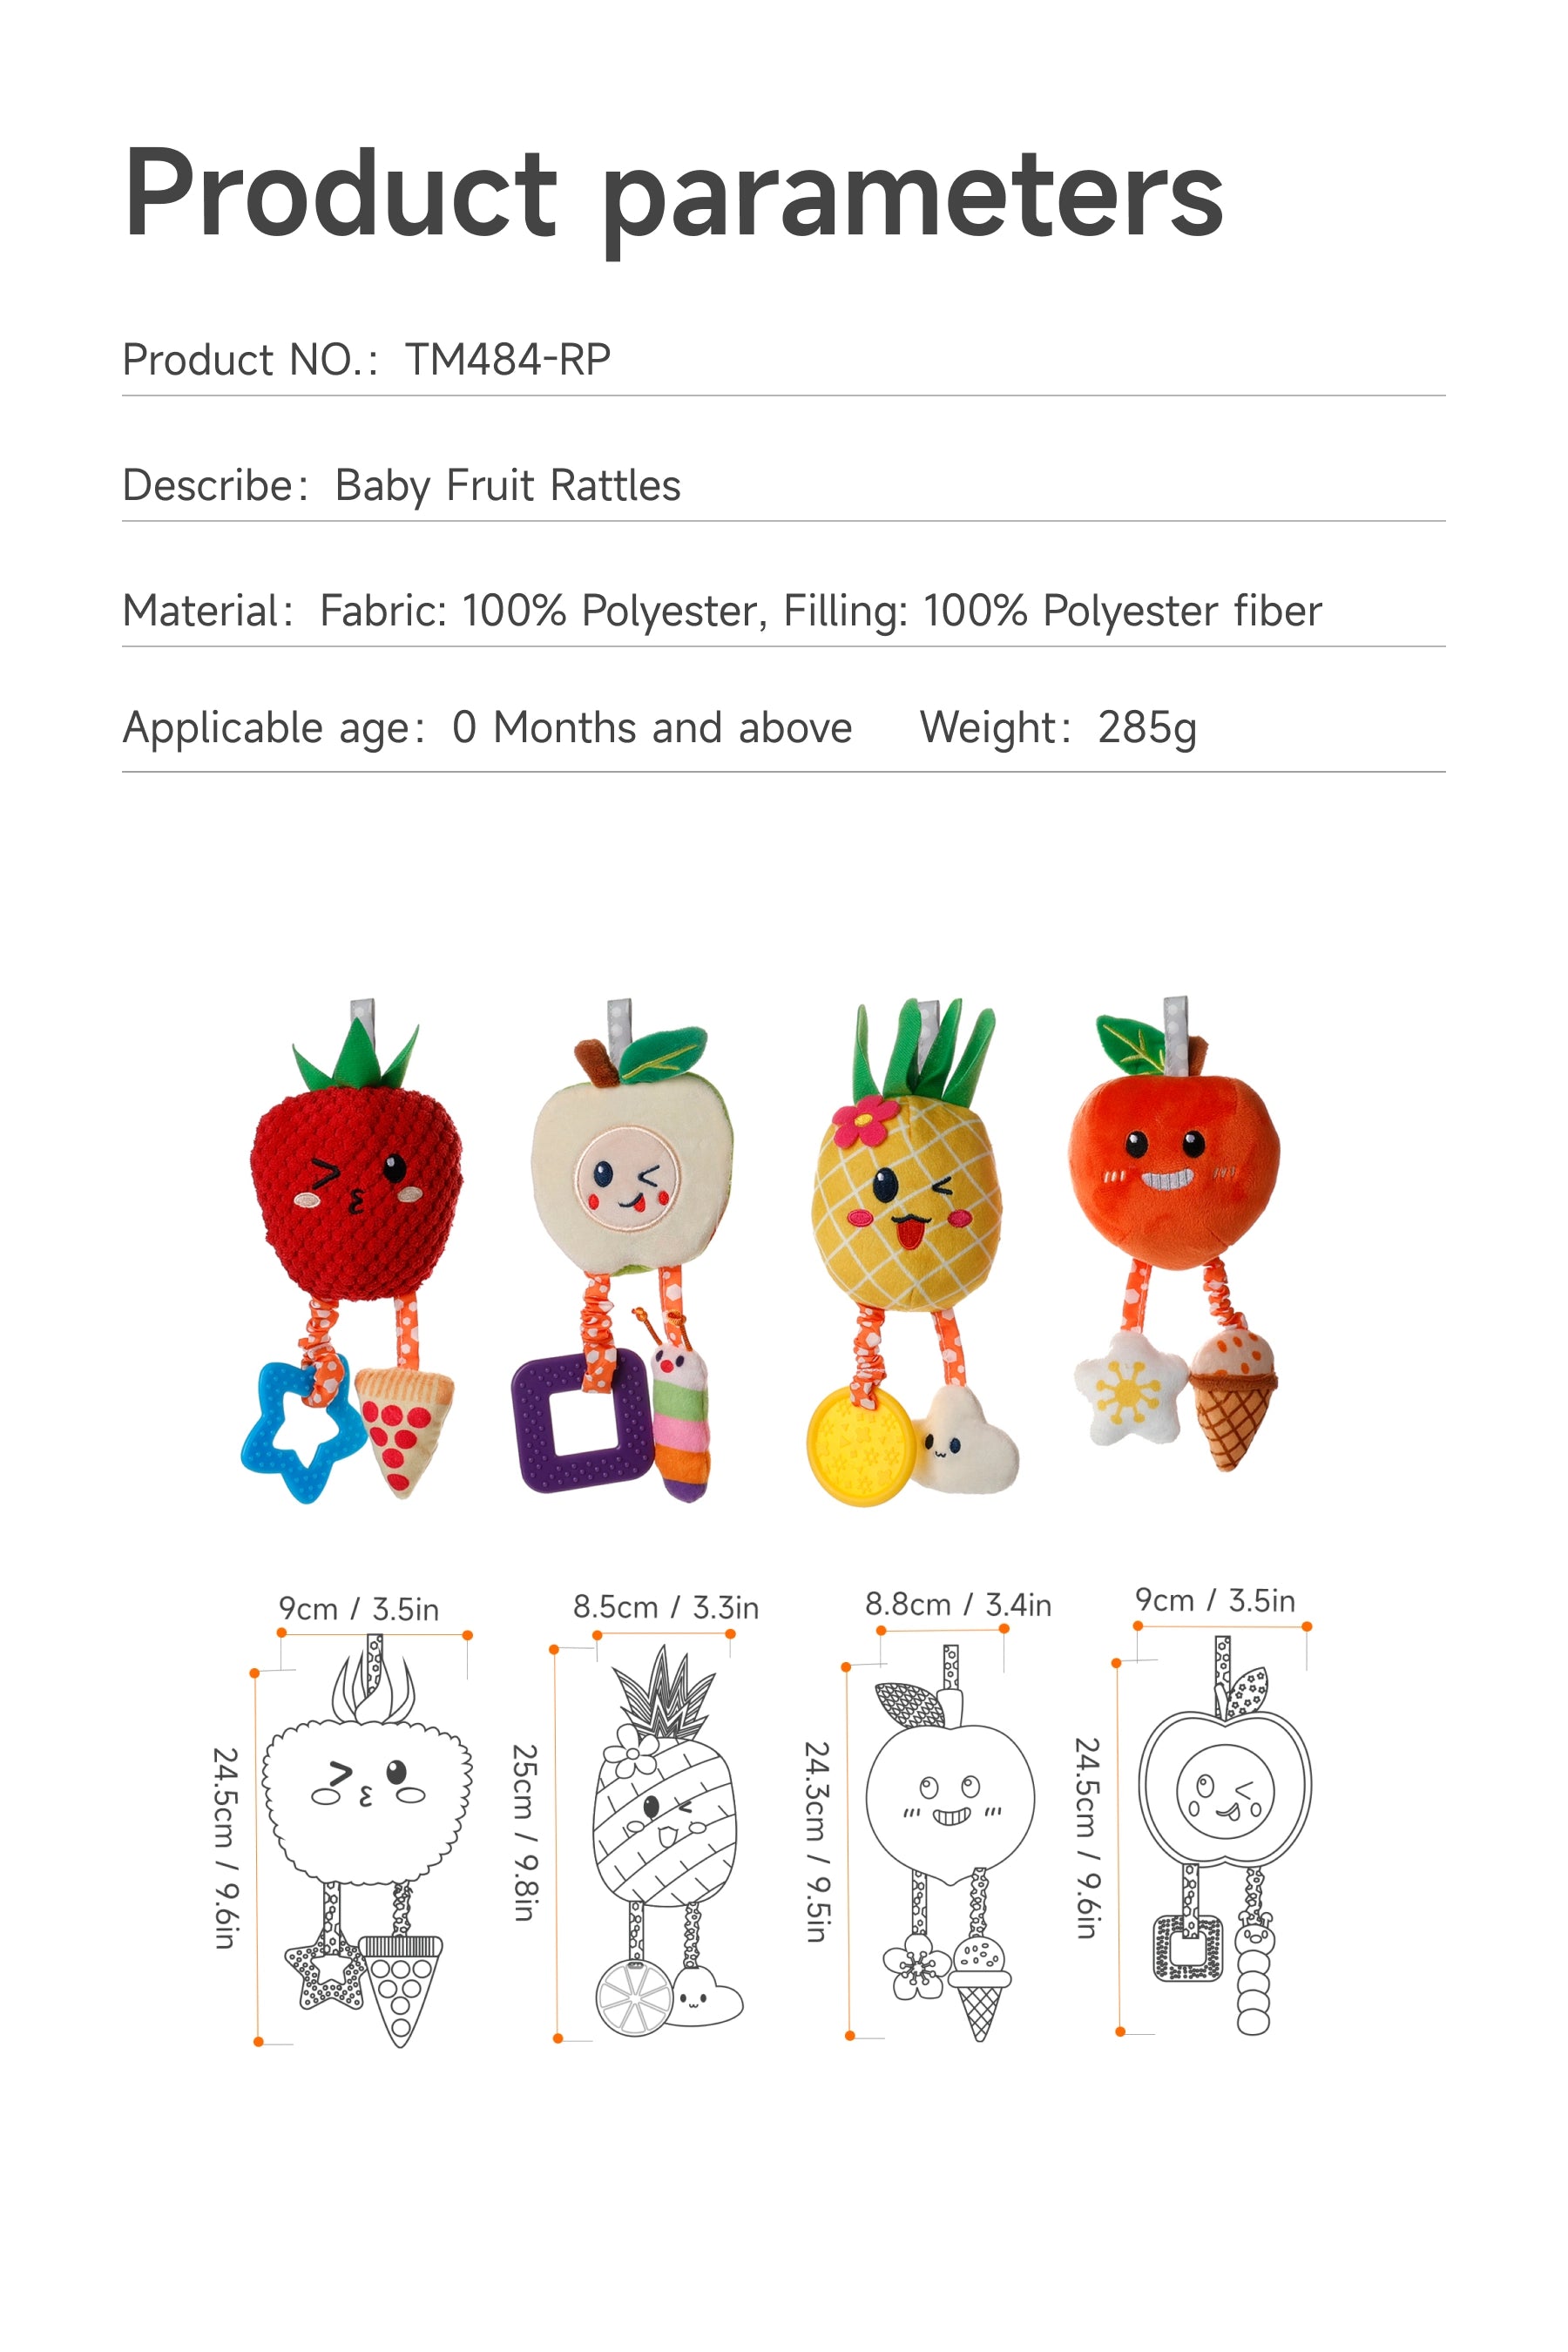 Baby toy with hanging fruit rattles for infant entertainment